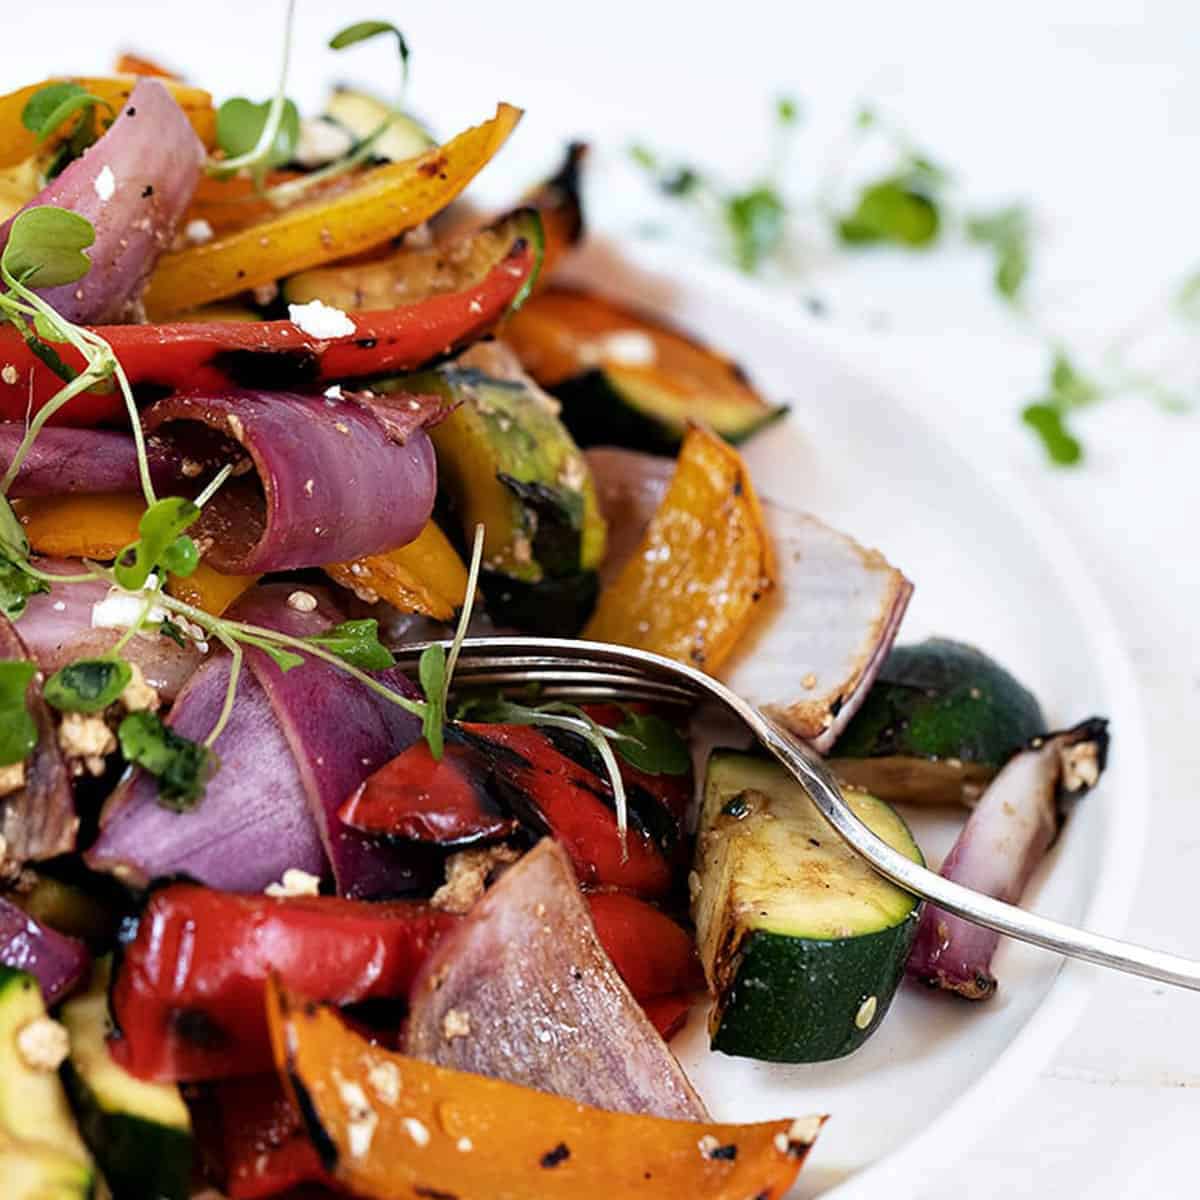 Grilled Vegetable Salad with Feta and Balsamic from https://www.seasonsandsuppers.ca/